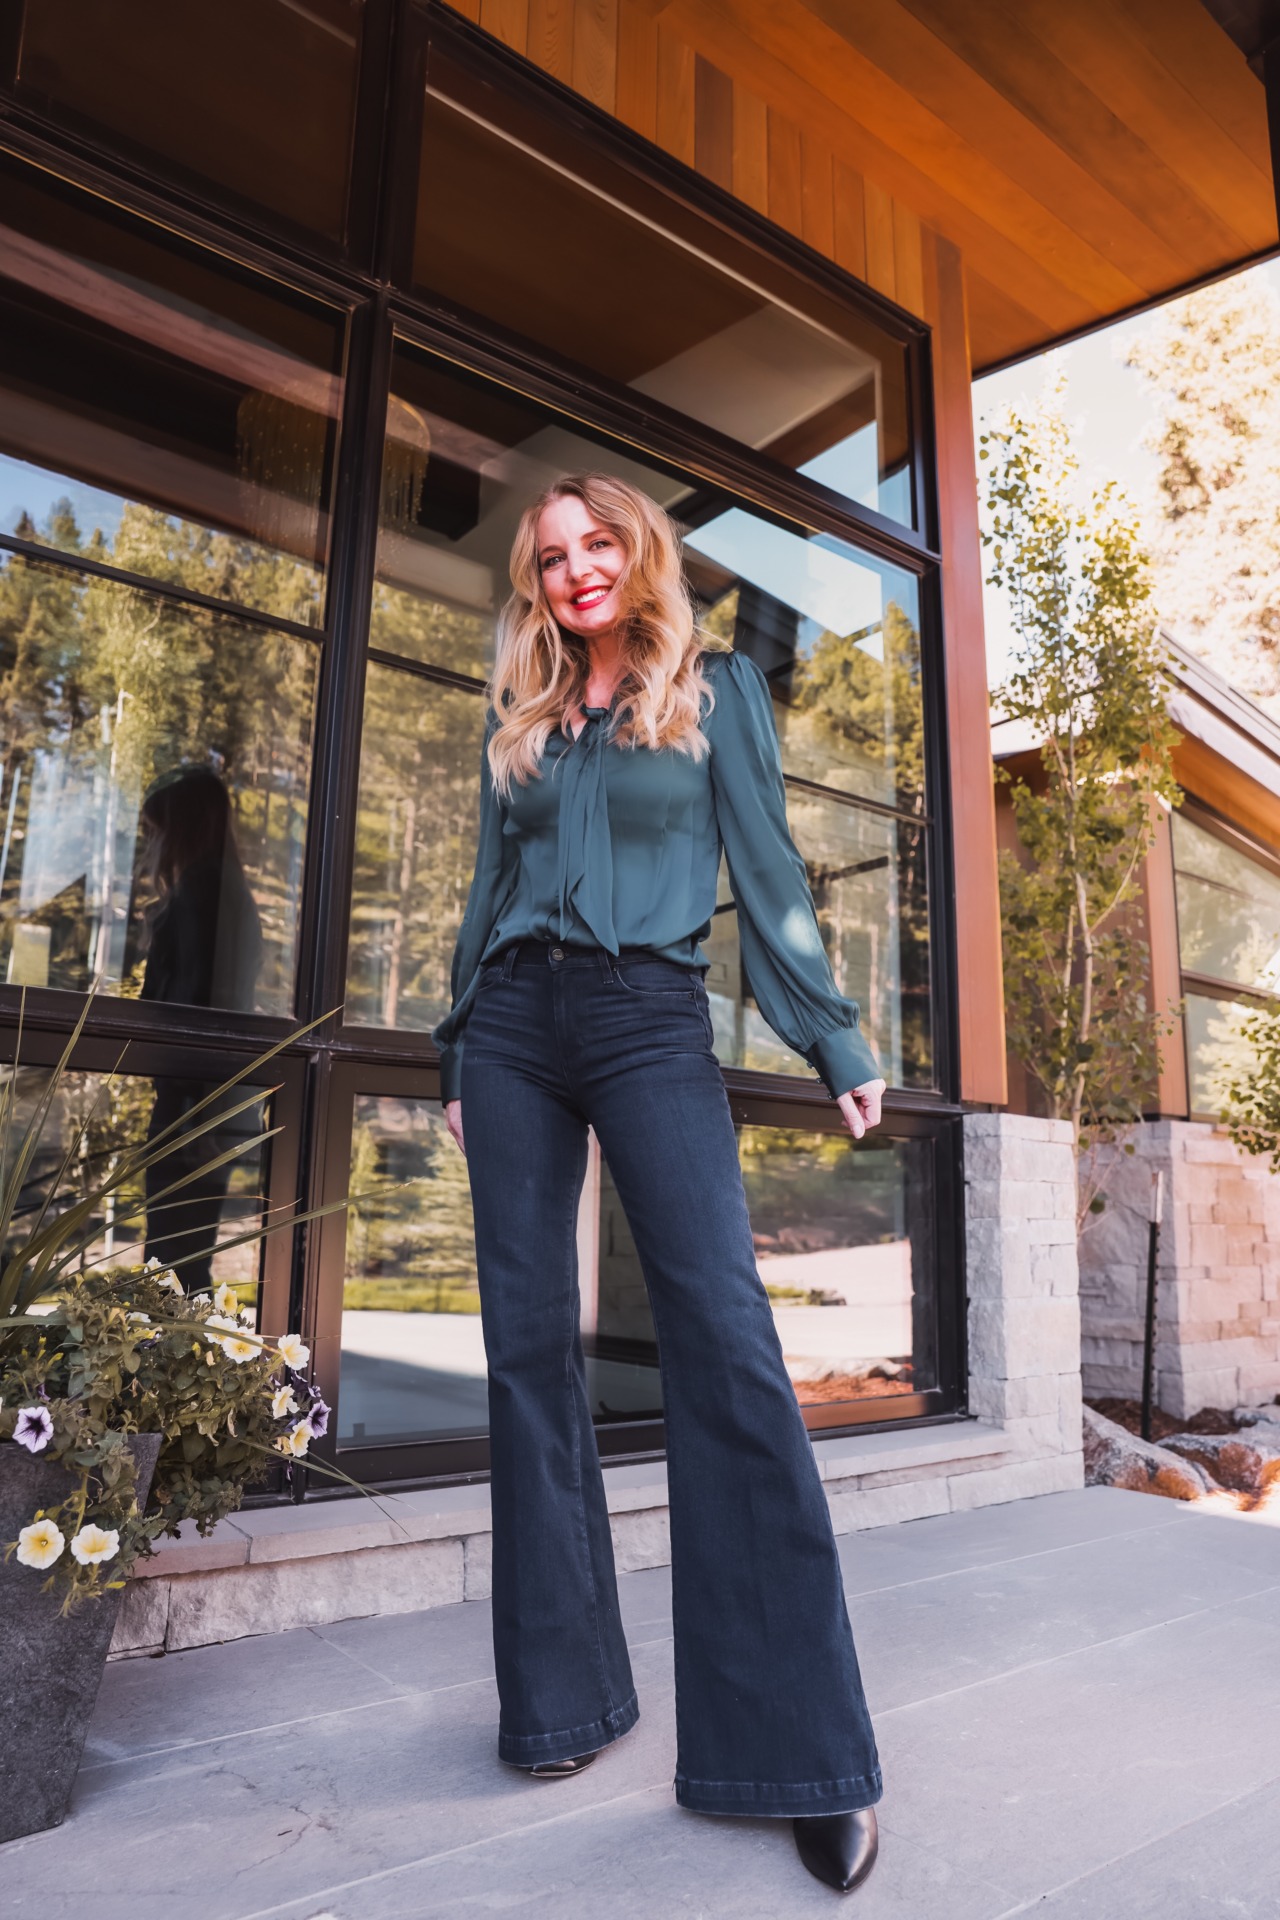 Jeans + Greens | How To Dress Up Jeans For A Holiday Party